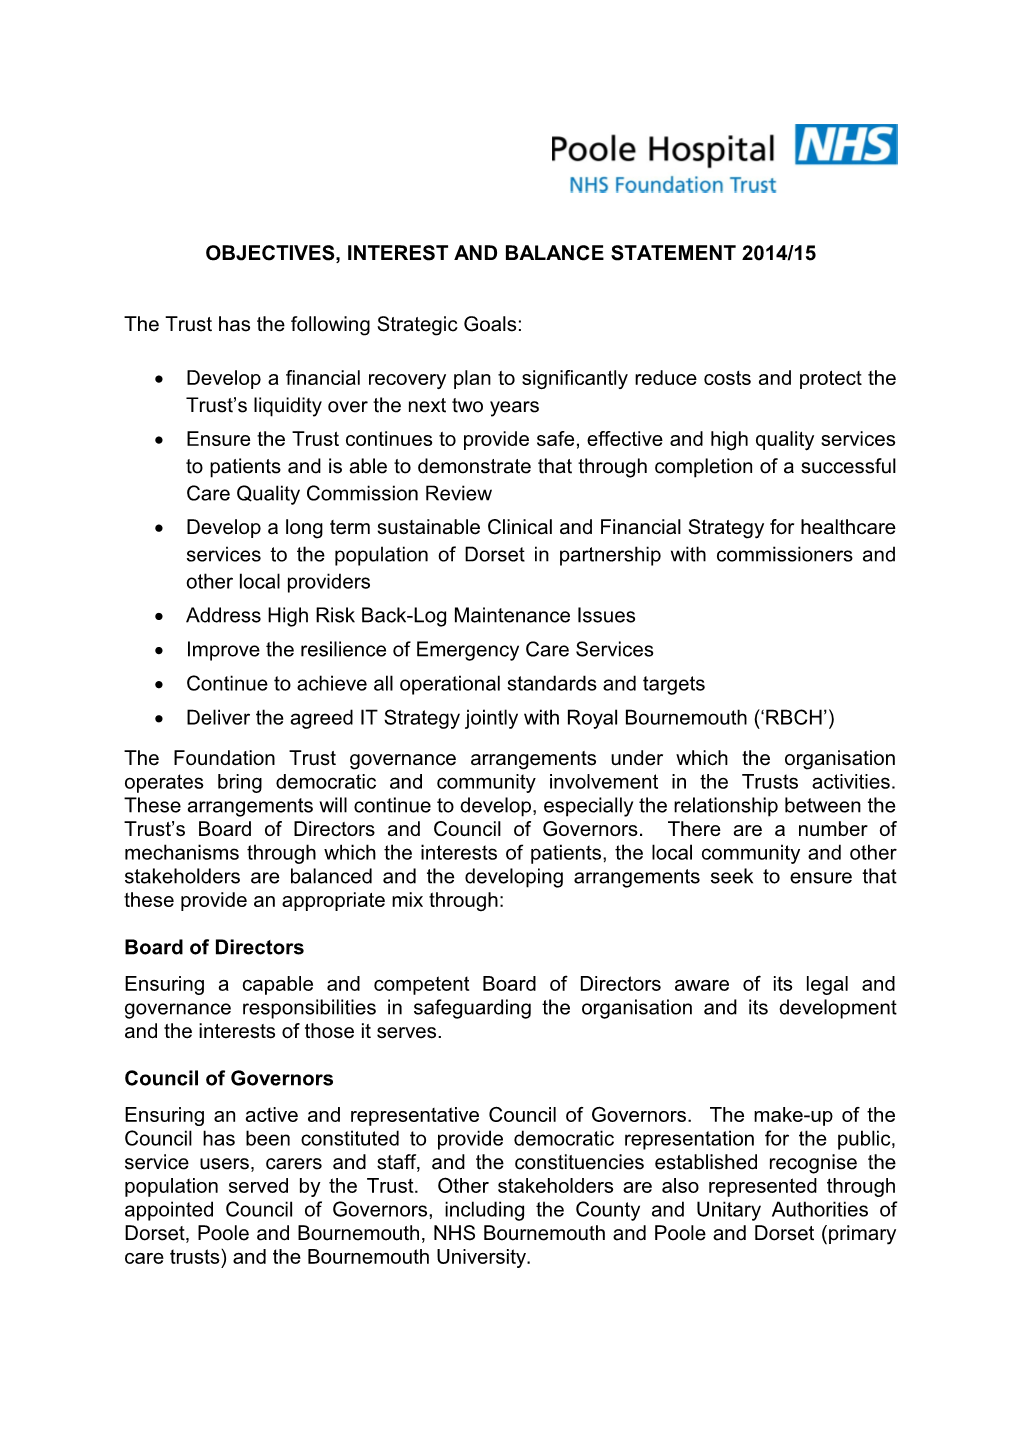 Objectives, Interest and Balance Statement 2014/15